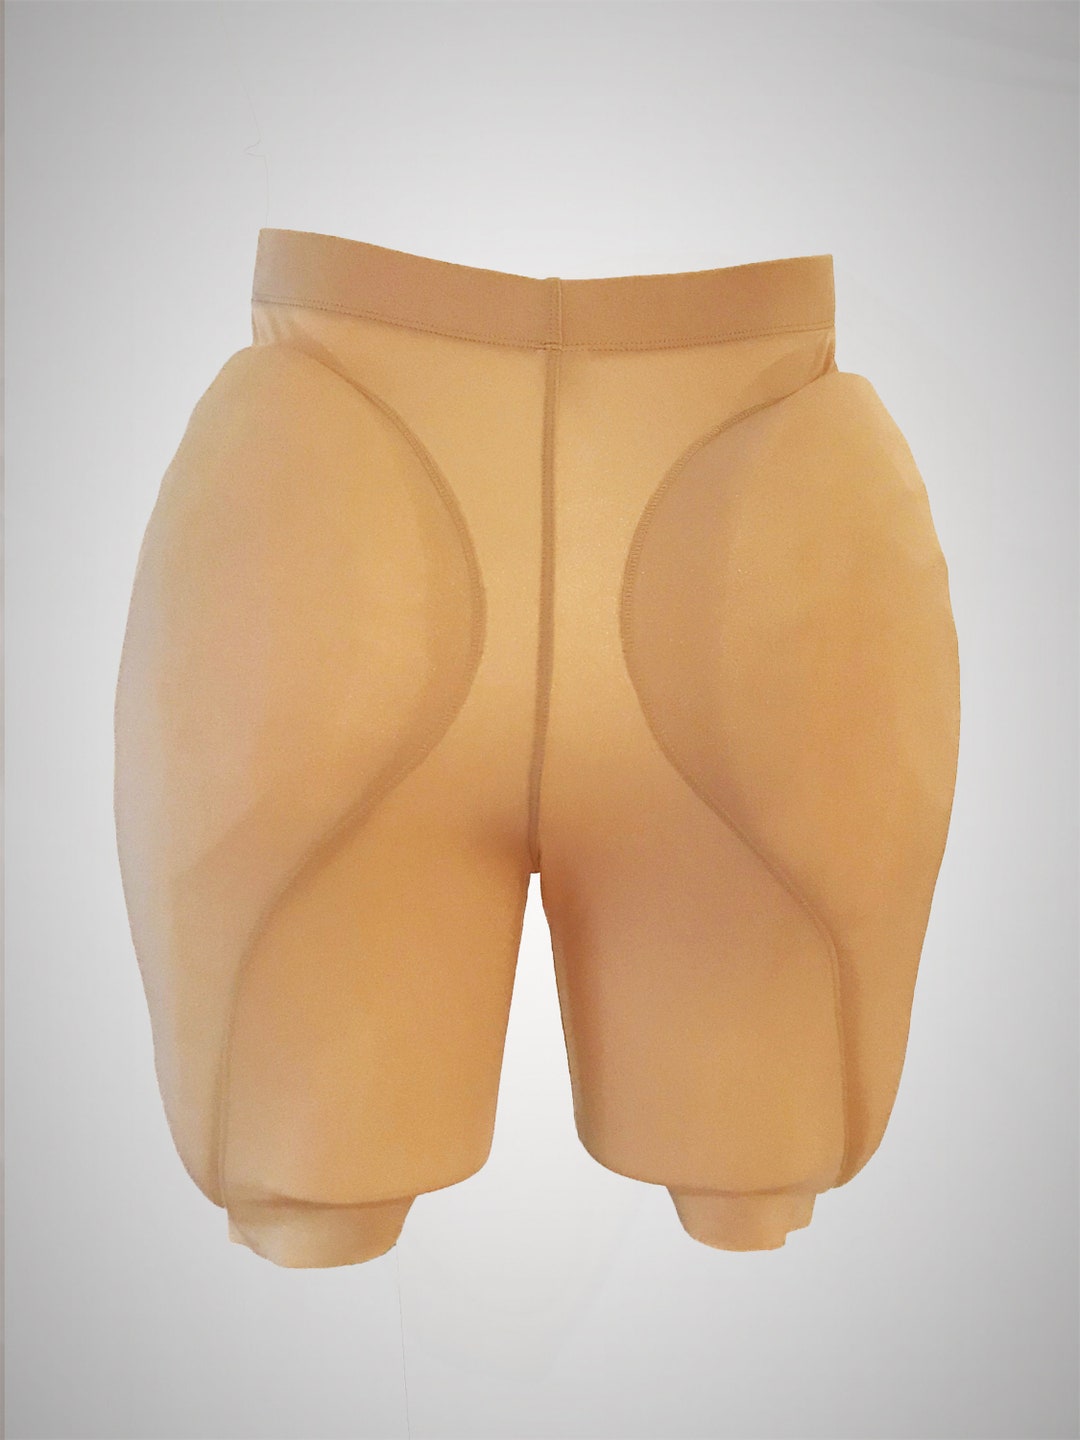 1 Inch Astrobooty Hip/butt Pads for M2F and Cross Dressers -  UK